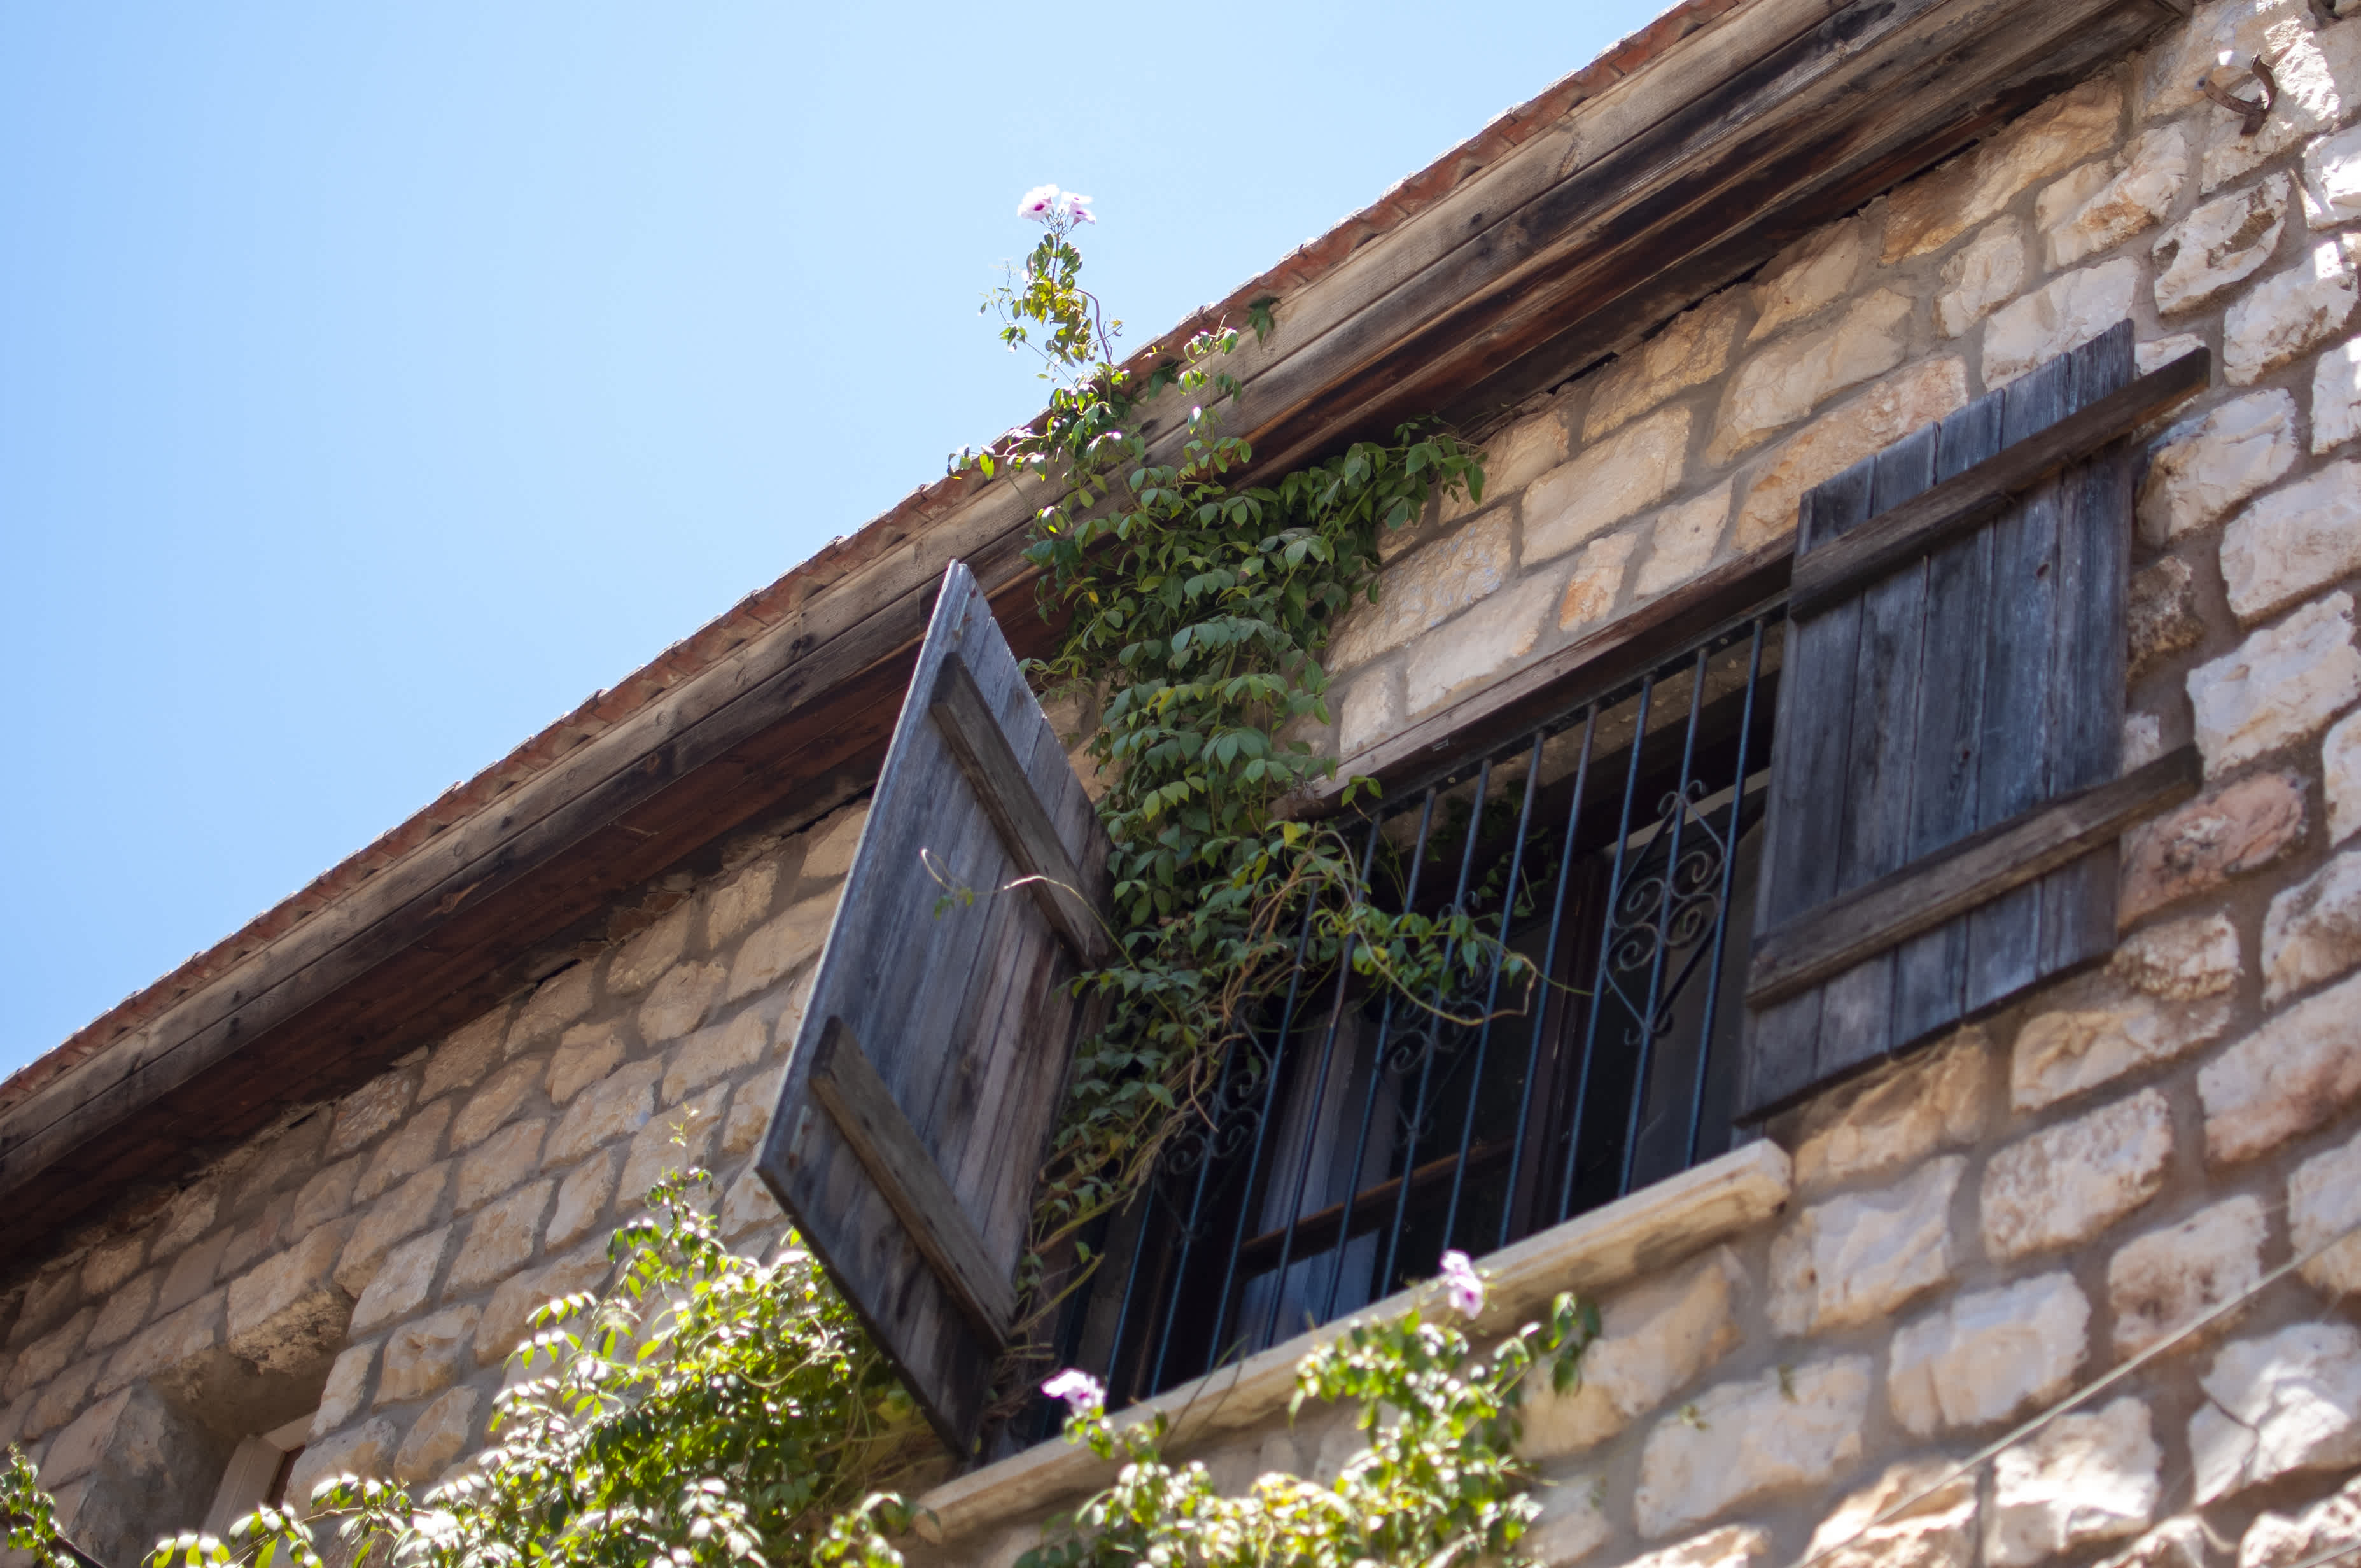 Open wooden shutters with metal bars behind them on an upper floor of a stone building. Plants are growing through the window